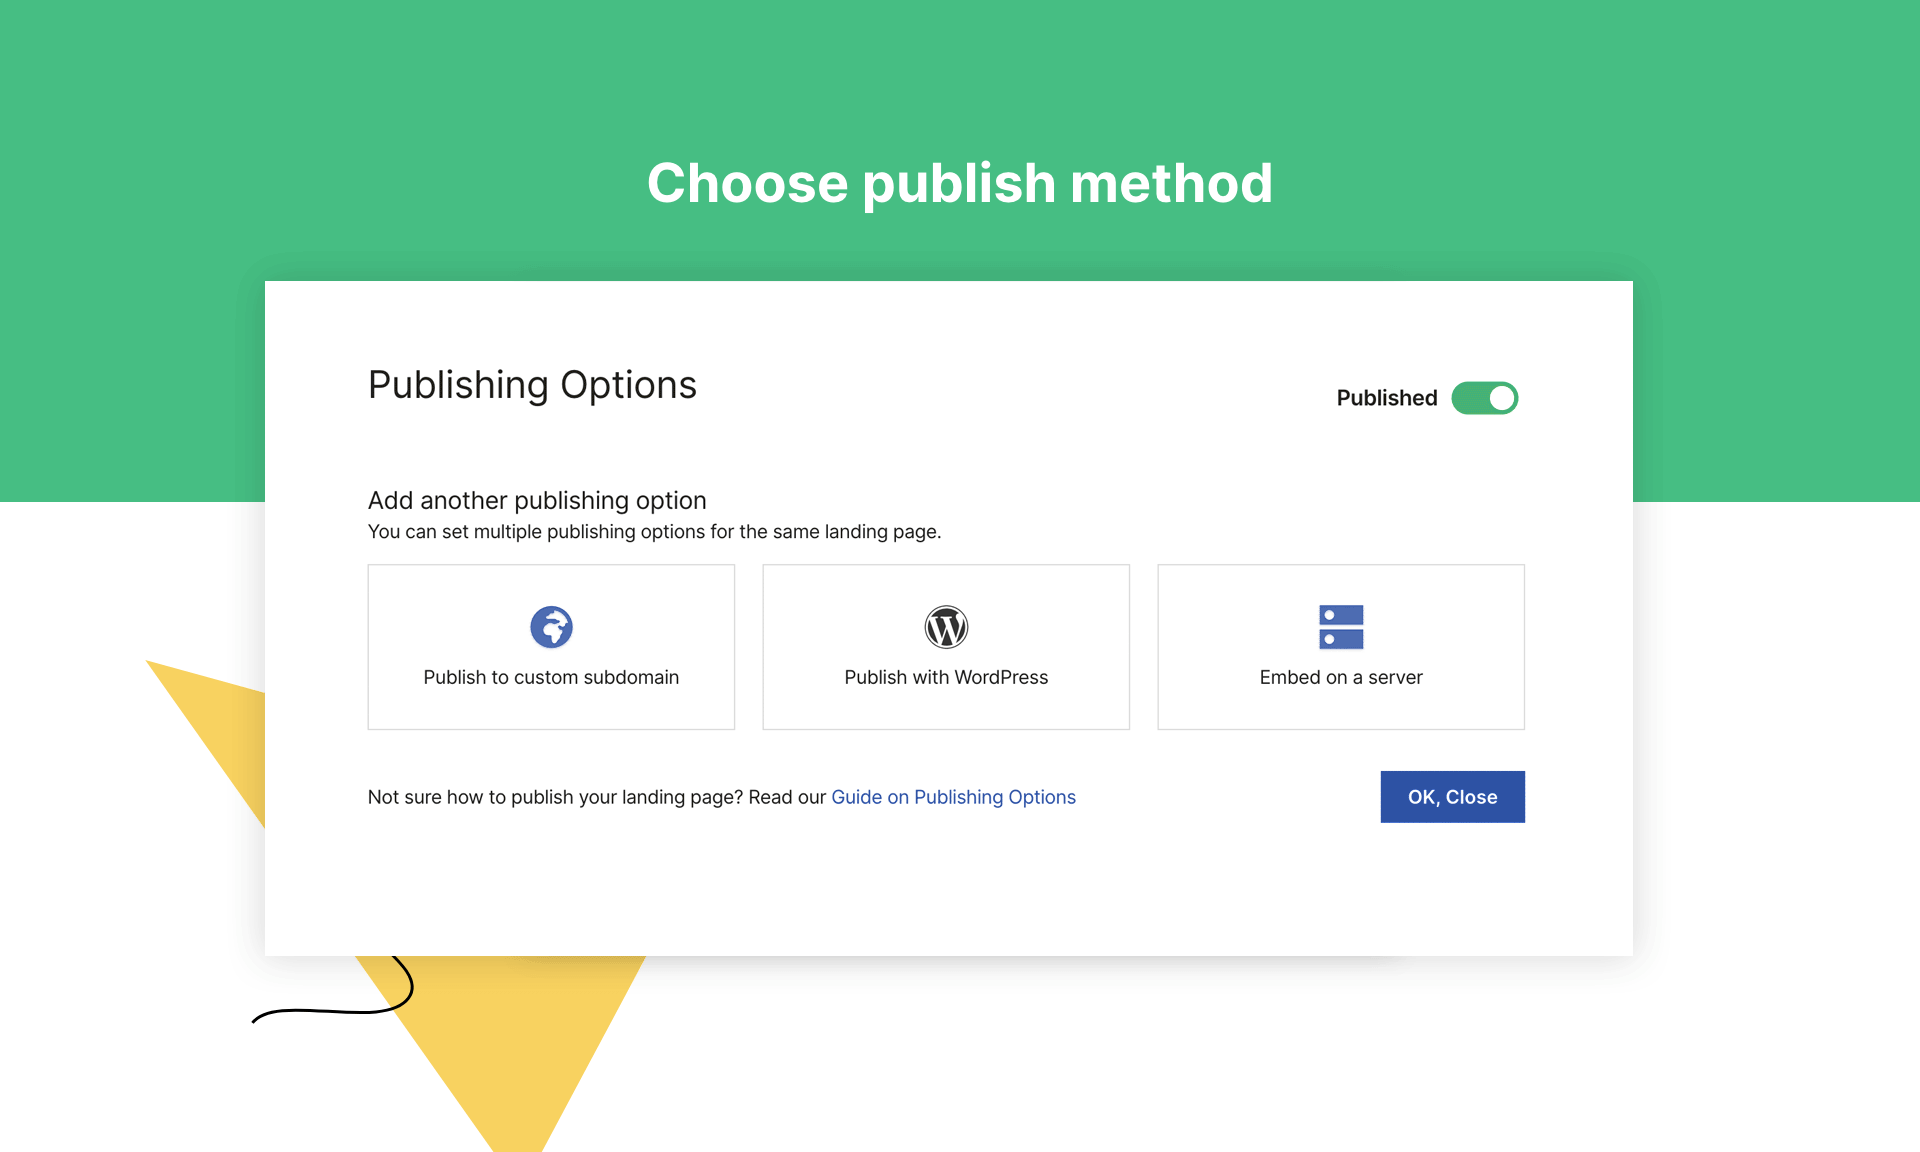 Choose the publication option tailored to your business needs: you can publish landing pages to your own subdomain, use a dedicated plugin to embed it on a WordPress or upload the project to your own server.